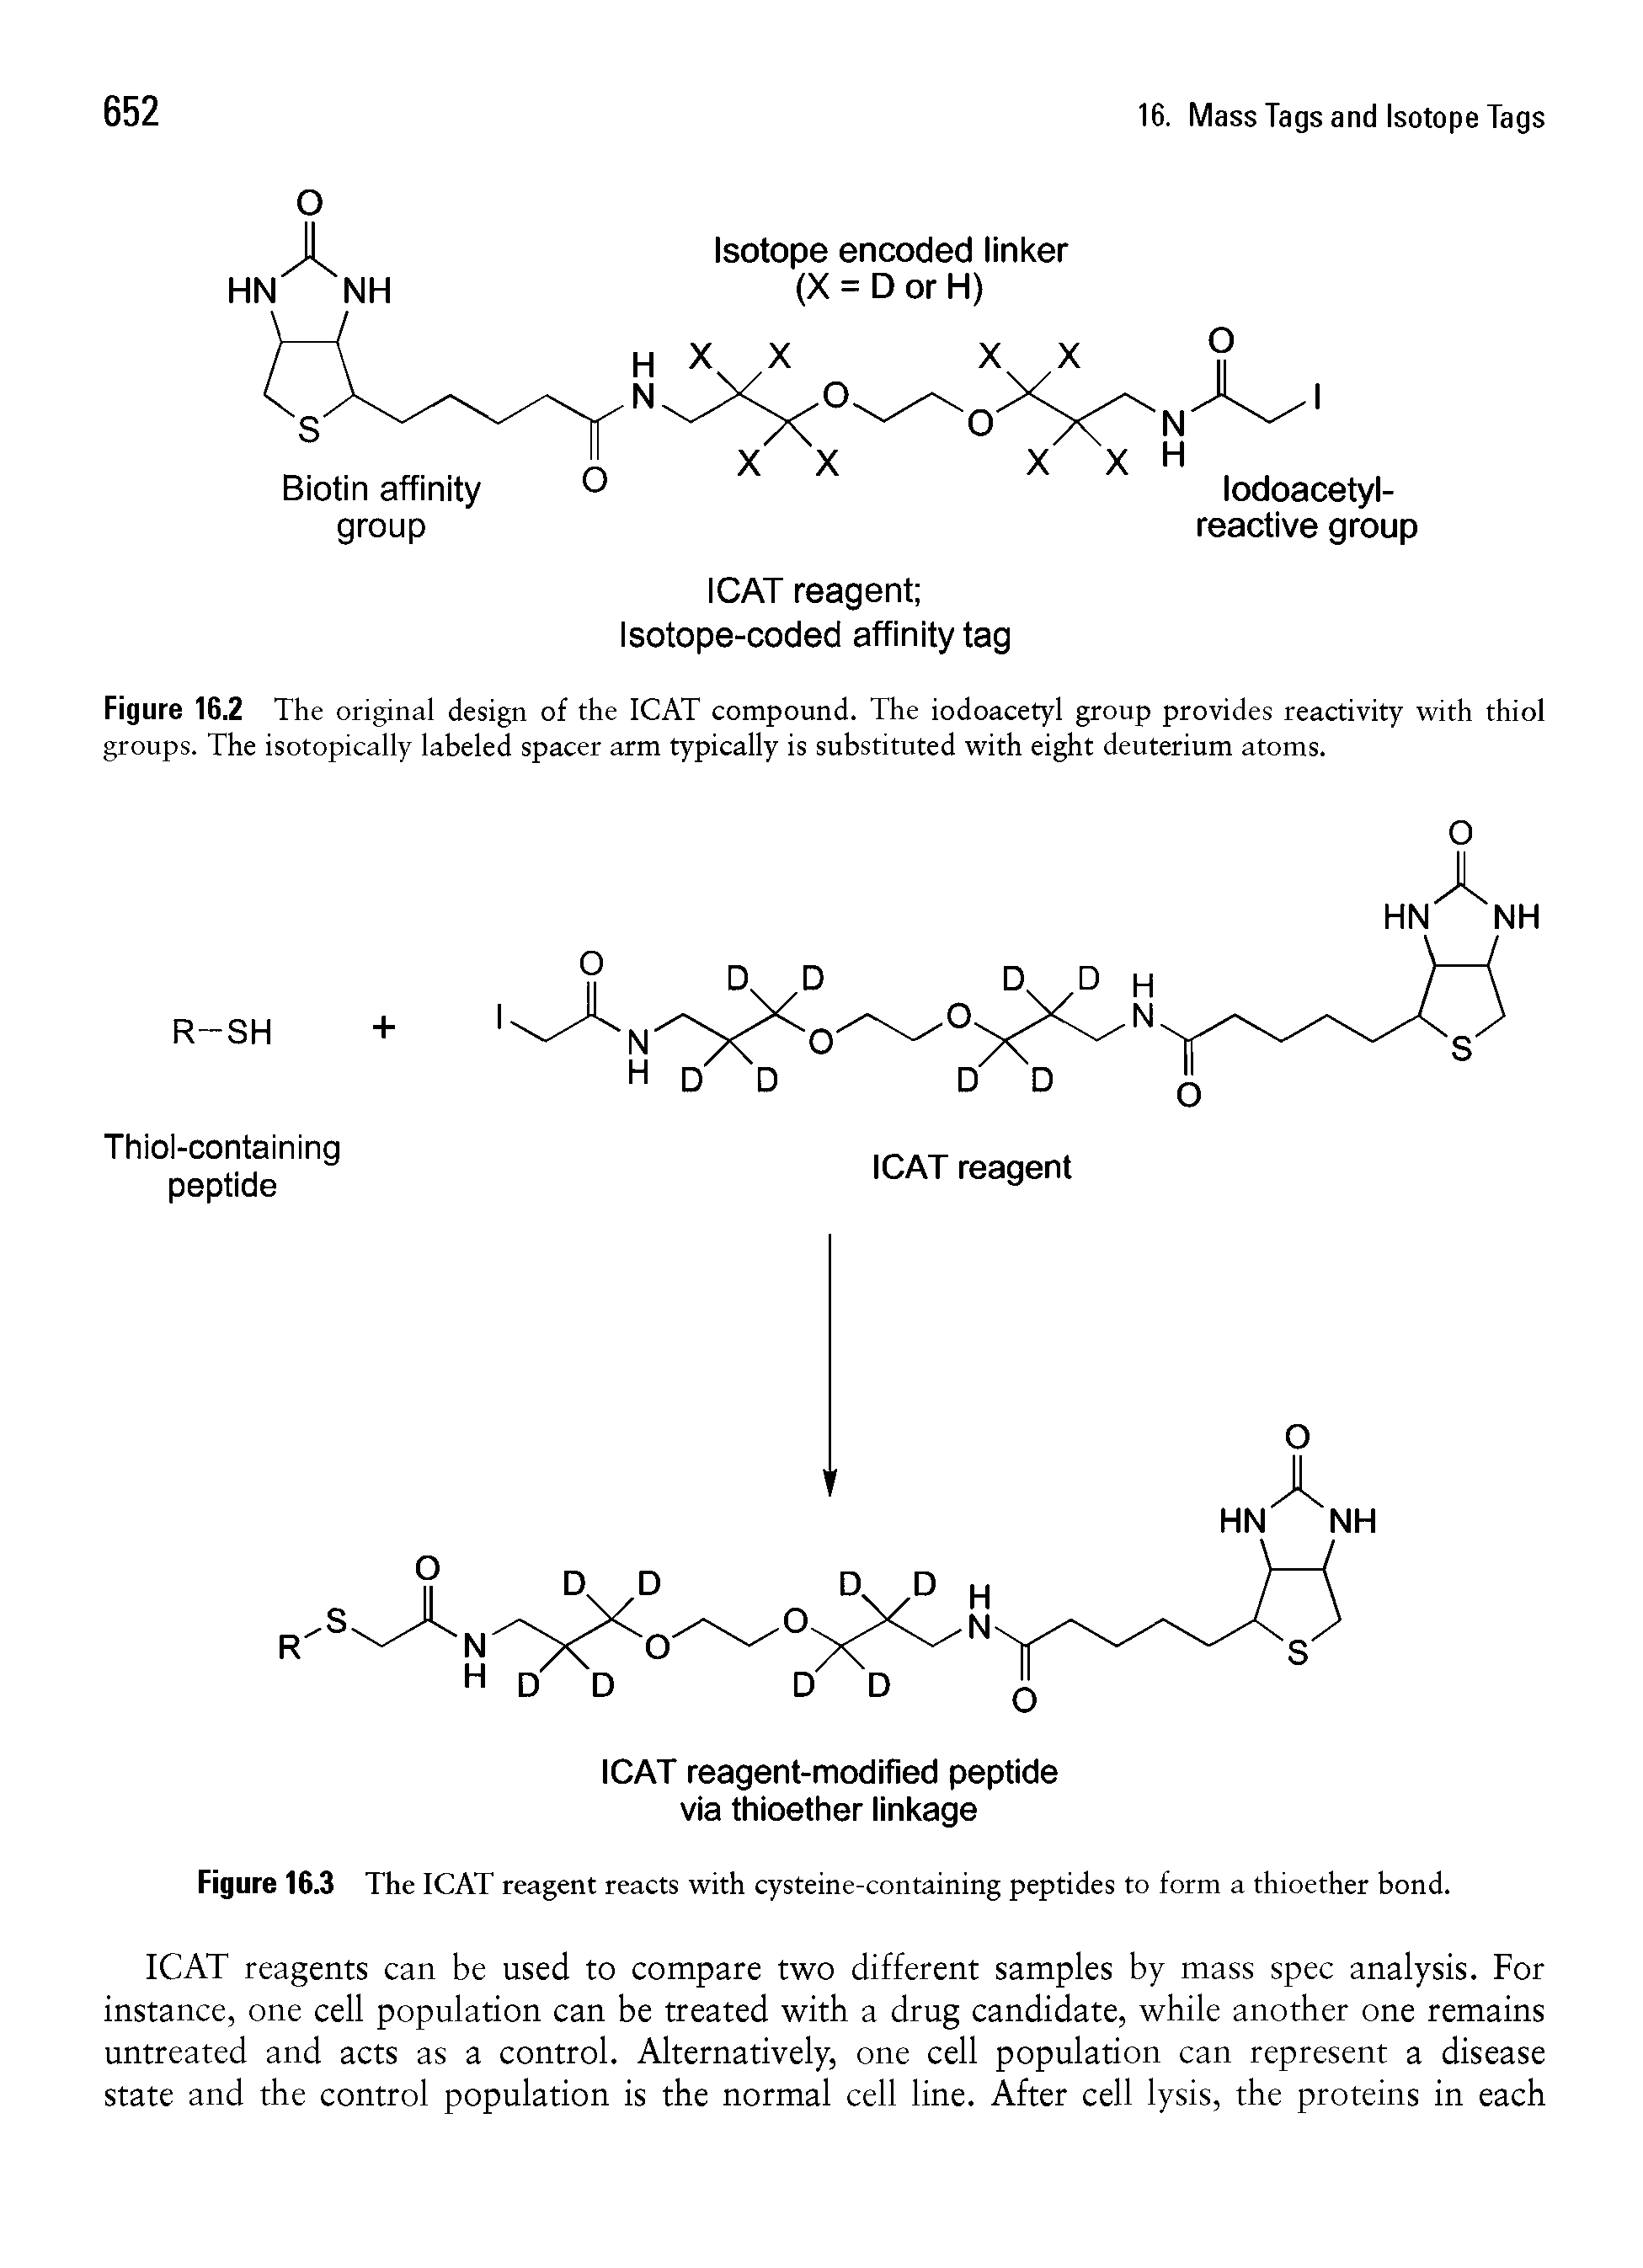 Figure 16.3 The ICAT reagent reacts with cysteine-containing peptides to form a thioether bond.